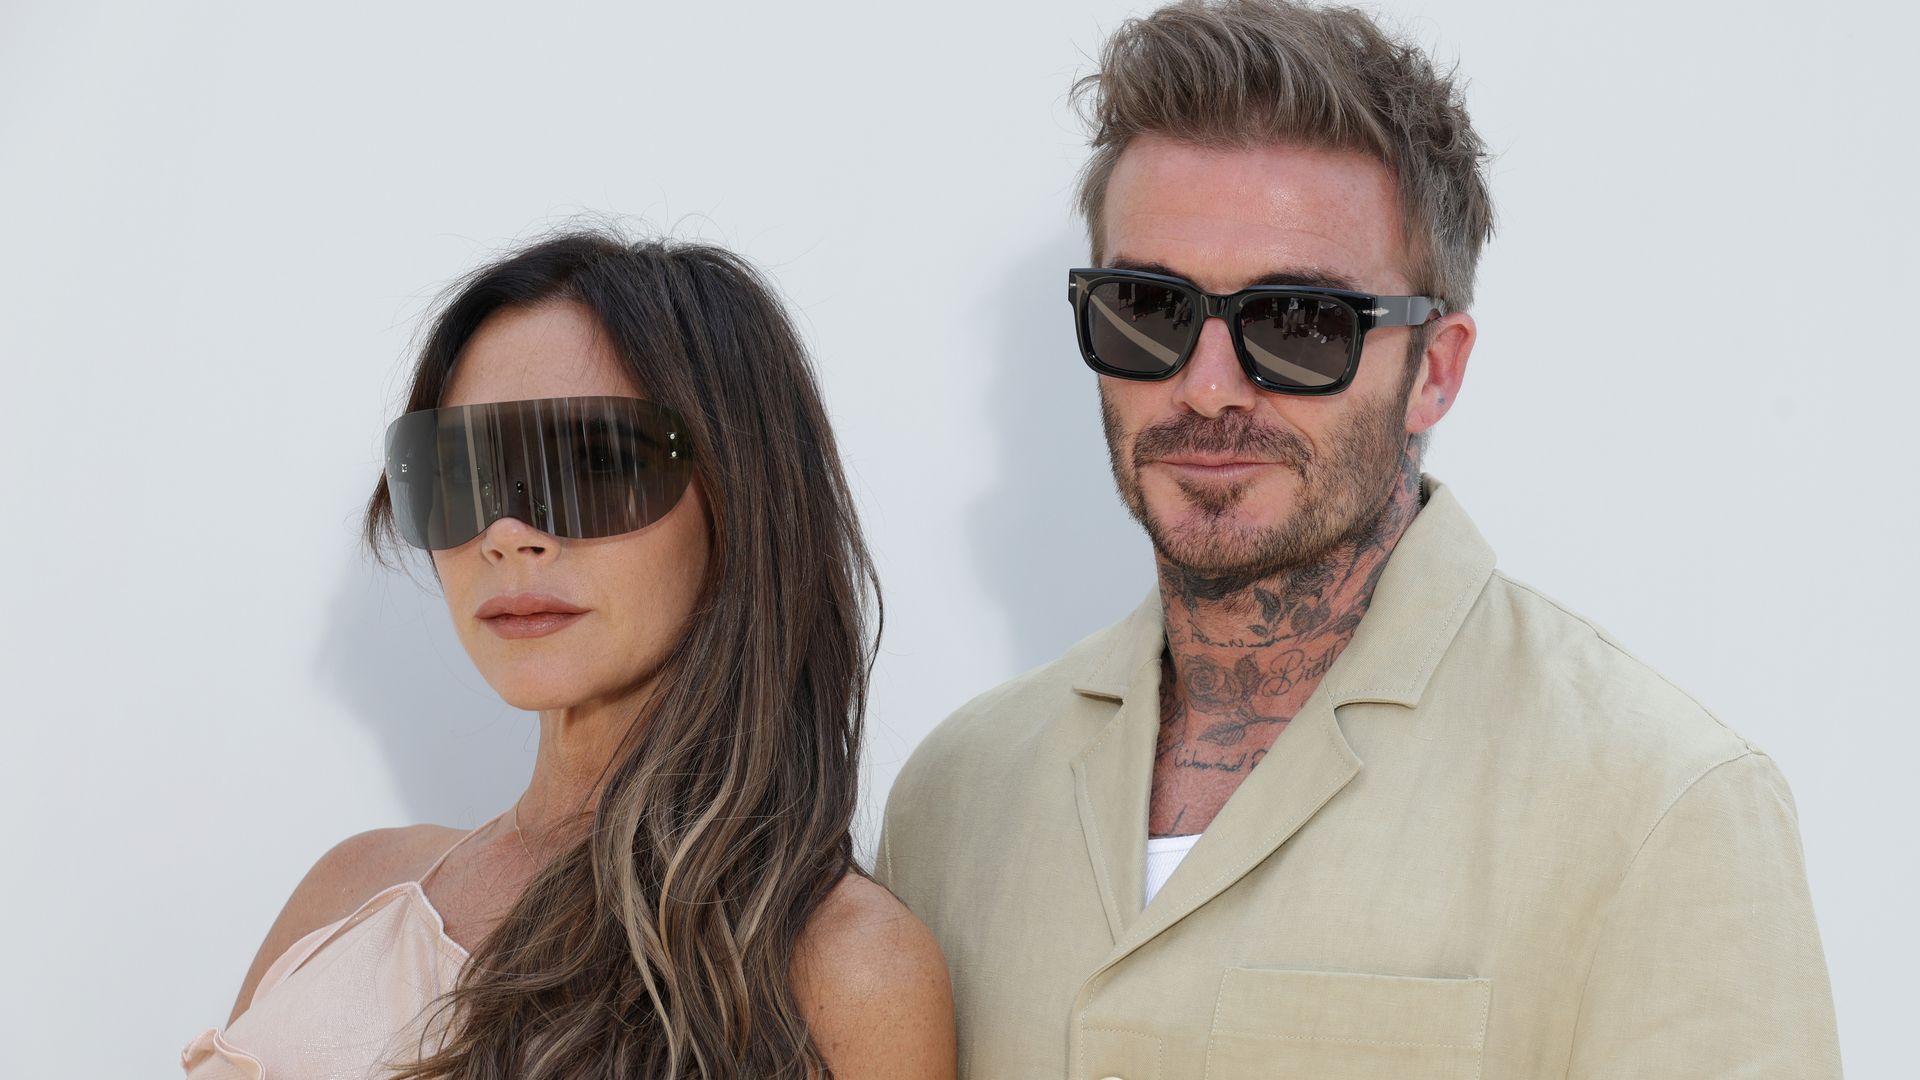 Victoria Beckham got a super edgy new piercing and nobody noticed